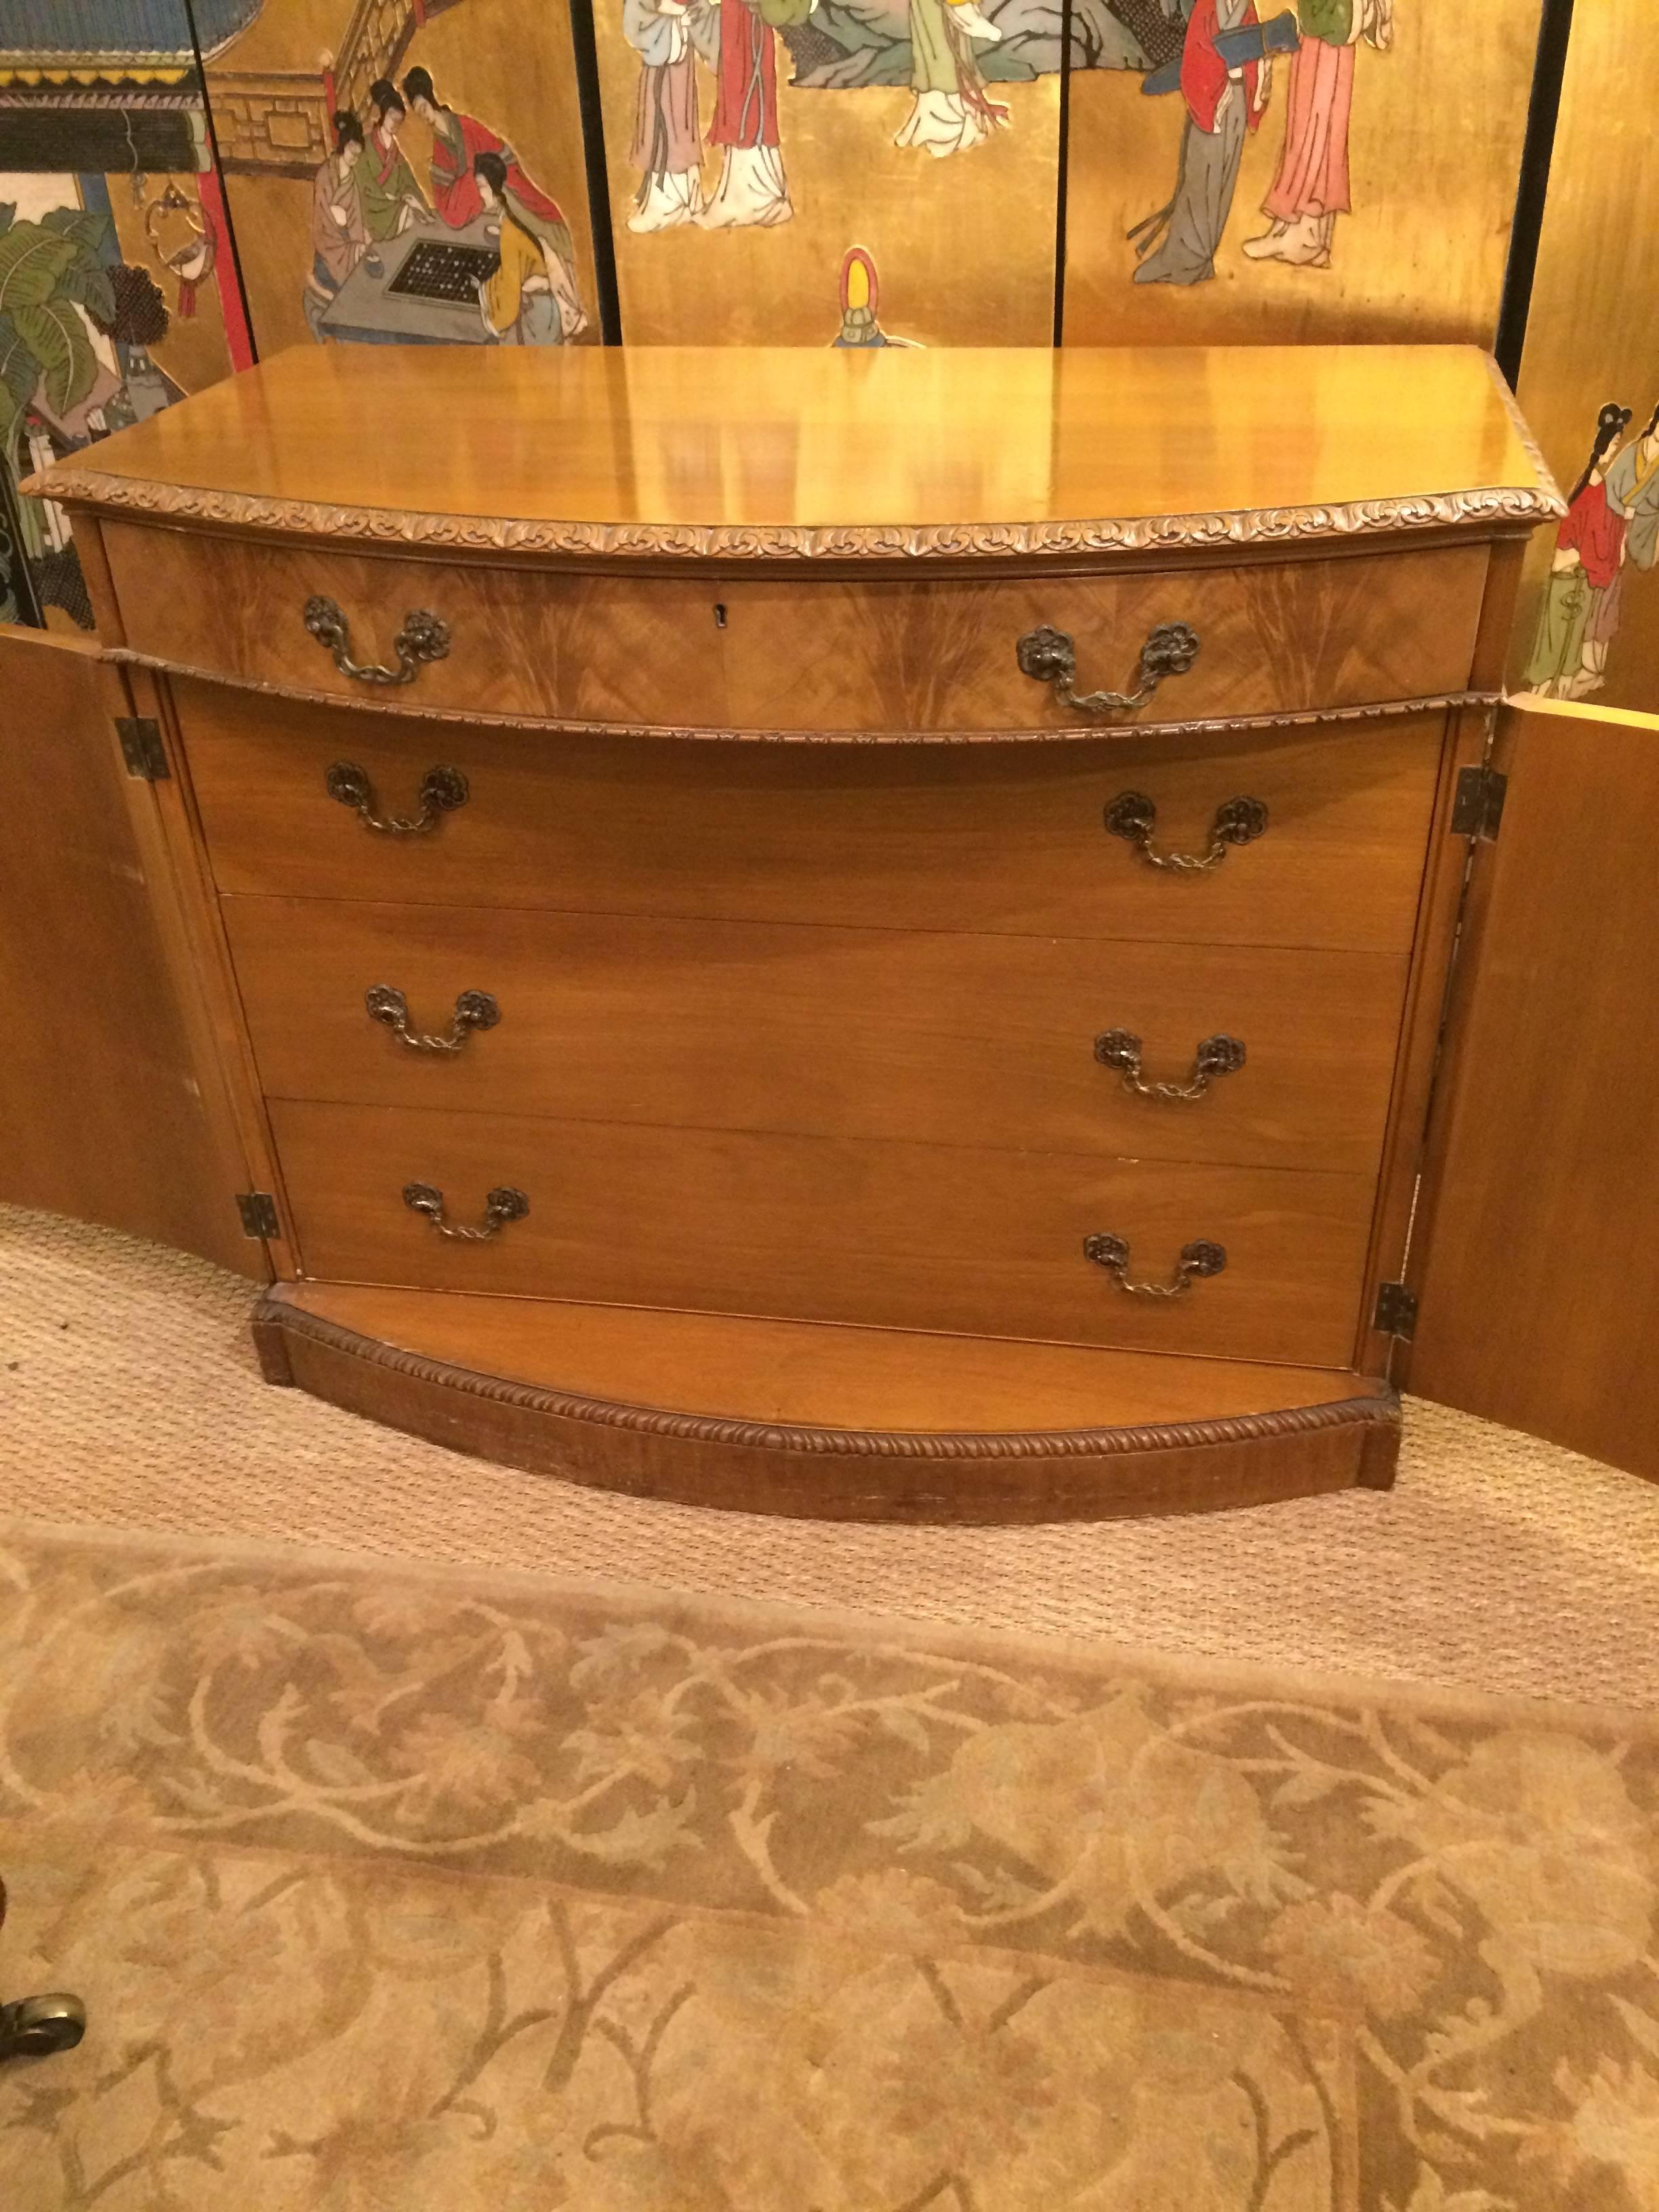 Gorgeous cabinet chest of drawers having one top drawer and beautiful front panel doors that open to reveal three drawers inside. Original hardware and key. Magnificent grain on the doors.